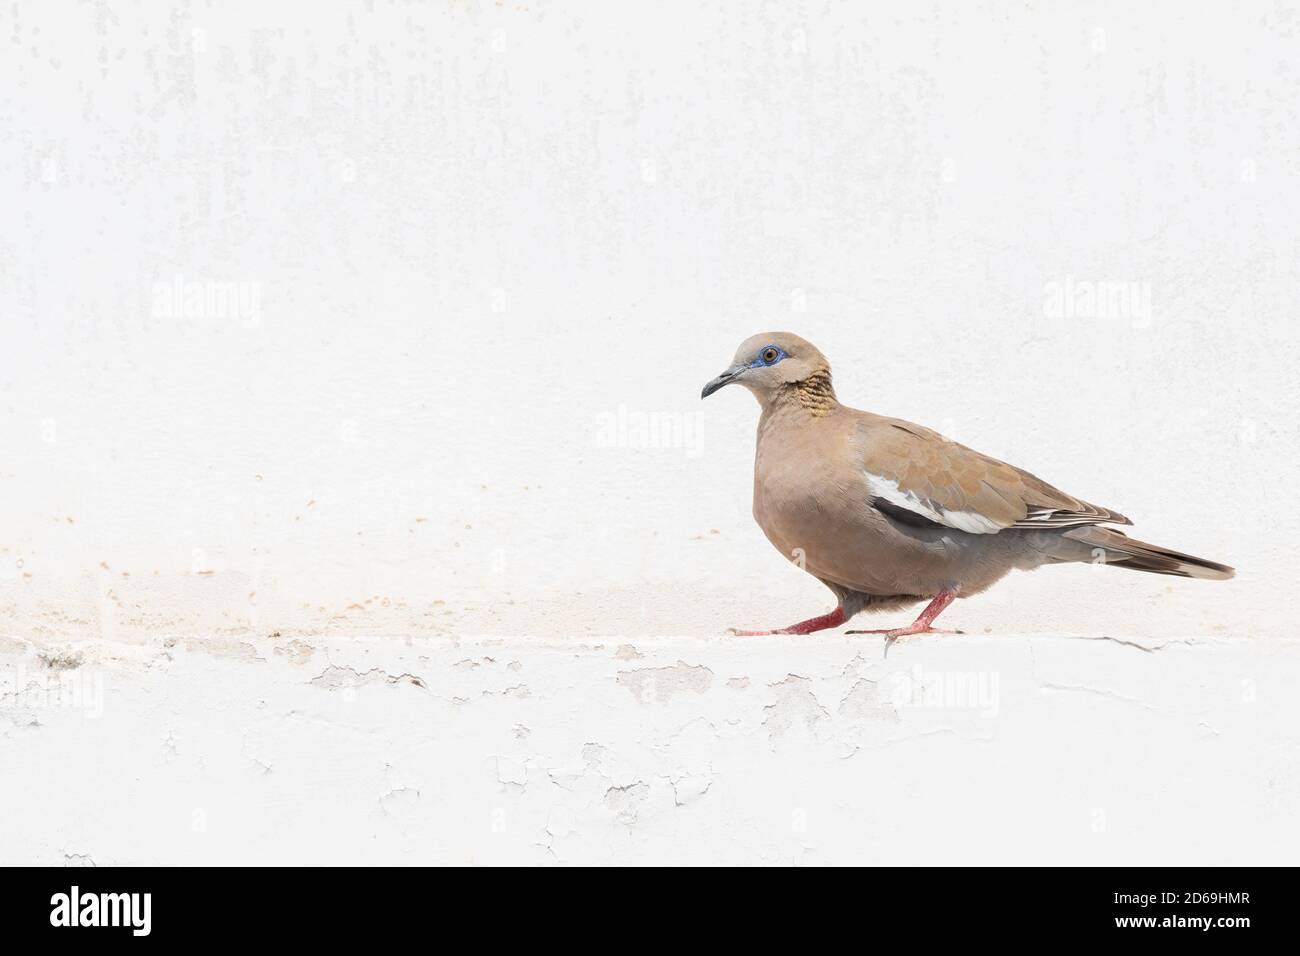 Known locally as the Cuculí because of the coo-ing call it makes, the Western Peruvian dove seen here on the coast of northern Peru Stock Photo